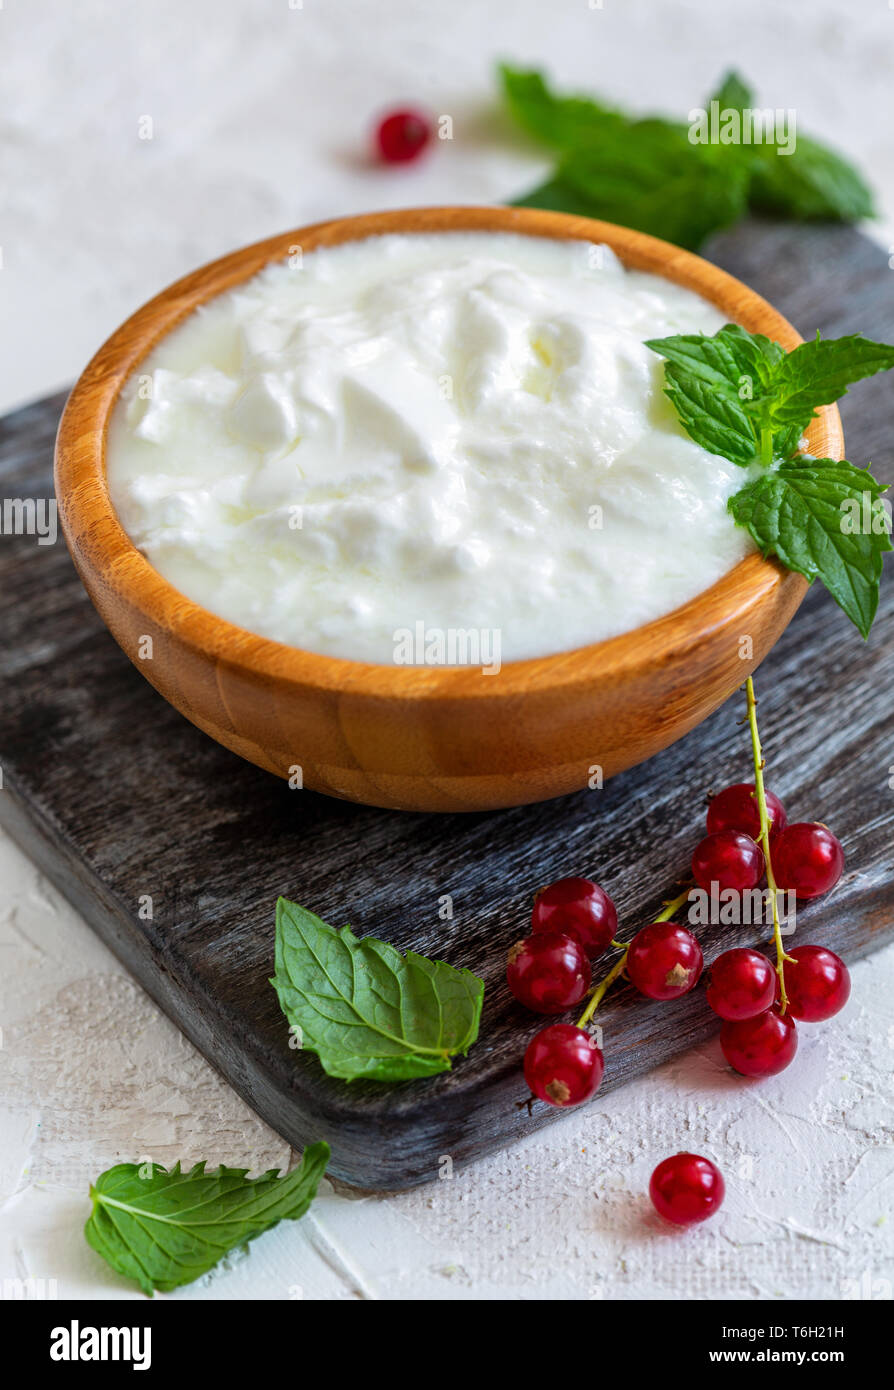 Bowl with homemade sour milk. Stock Photo